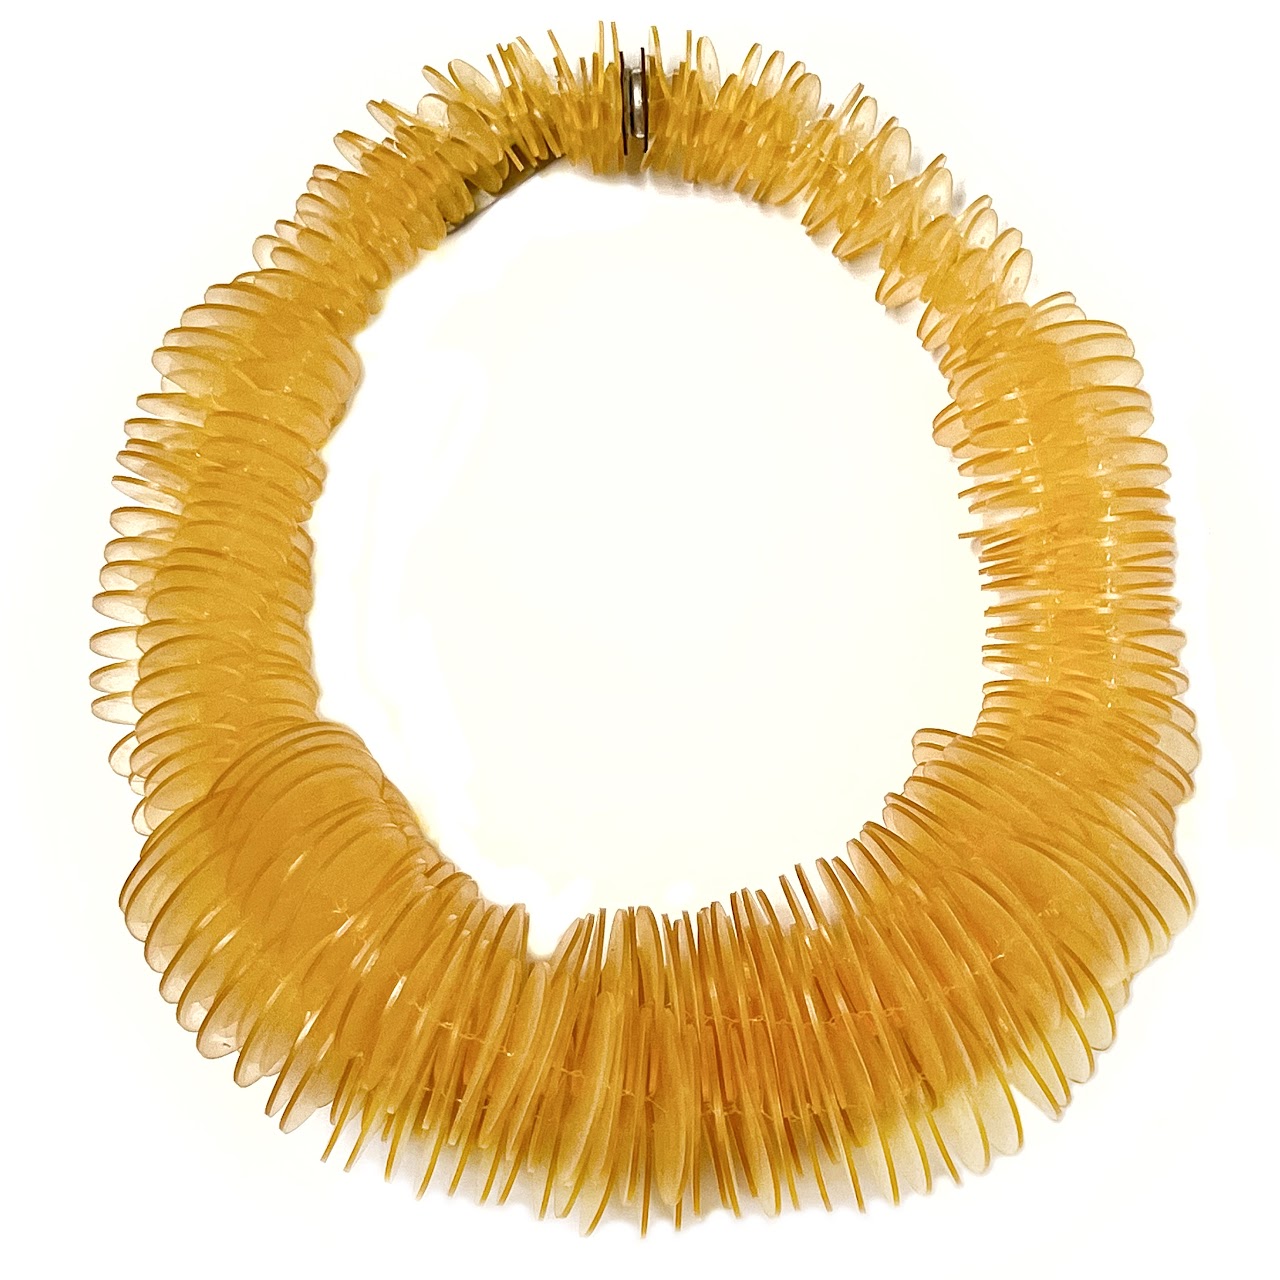 Ports 1961 Statement Necklace